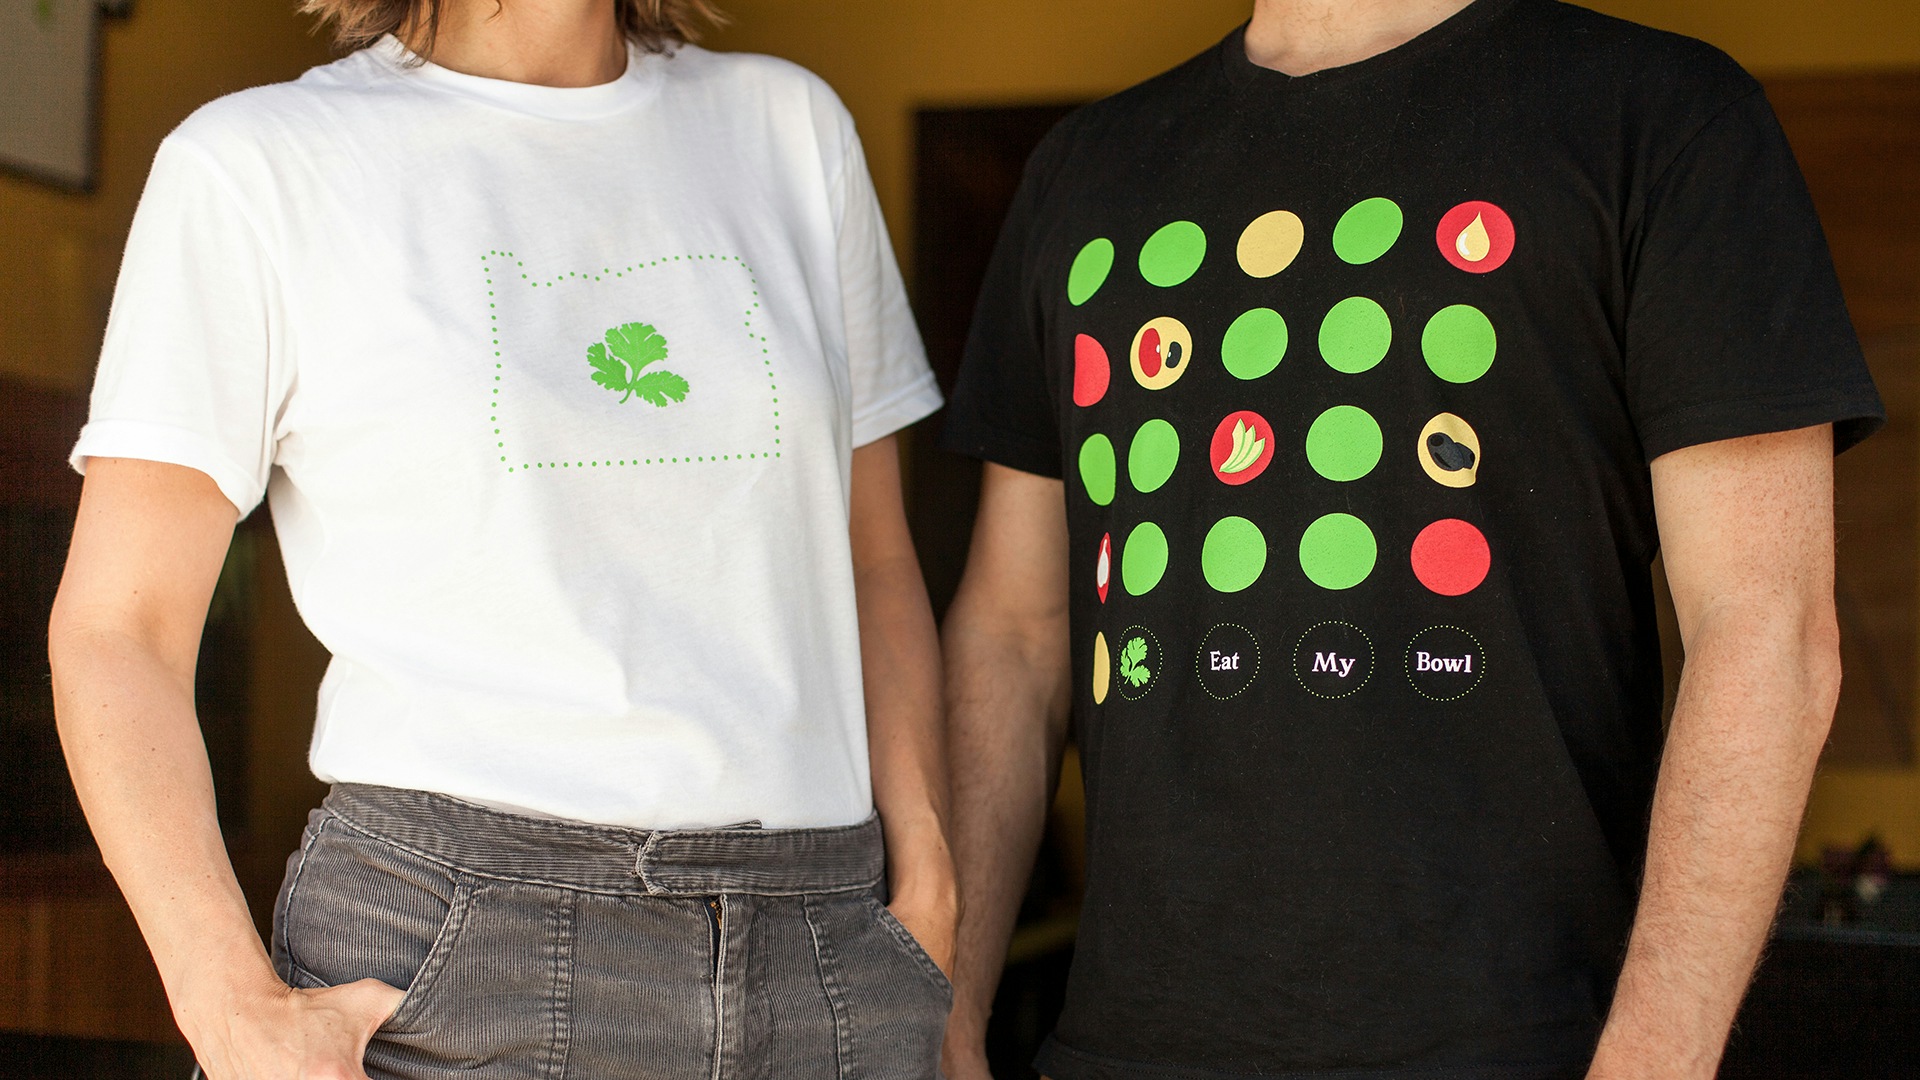 Two of the shirts we designed for Whole Bowl. The first is a white shirt with the Oregon state silhouette with the Whole Bowl cilantro leaf in the center. The second shirt features the illustrated menu items with the words "Eat my bowl" at the bottom.